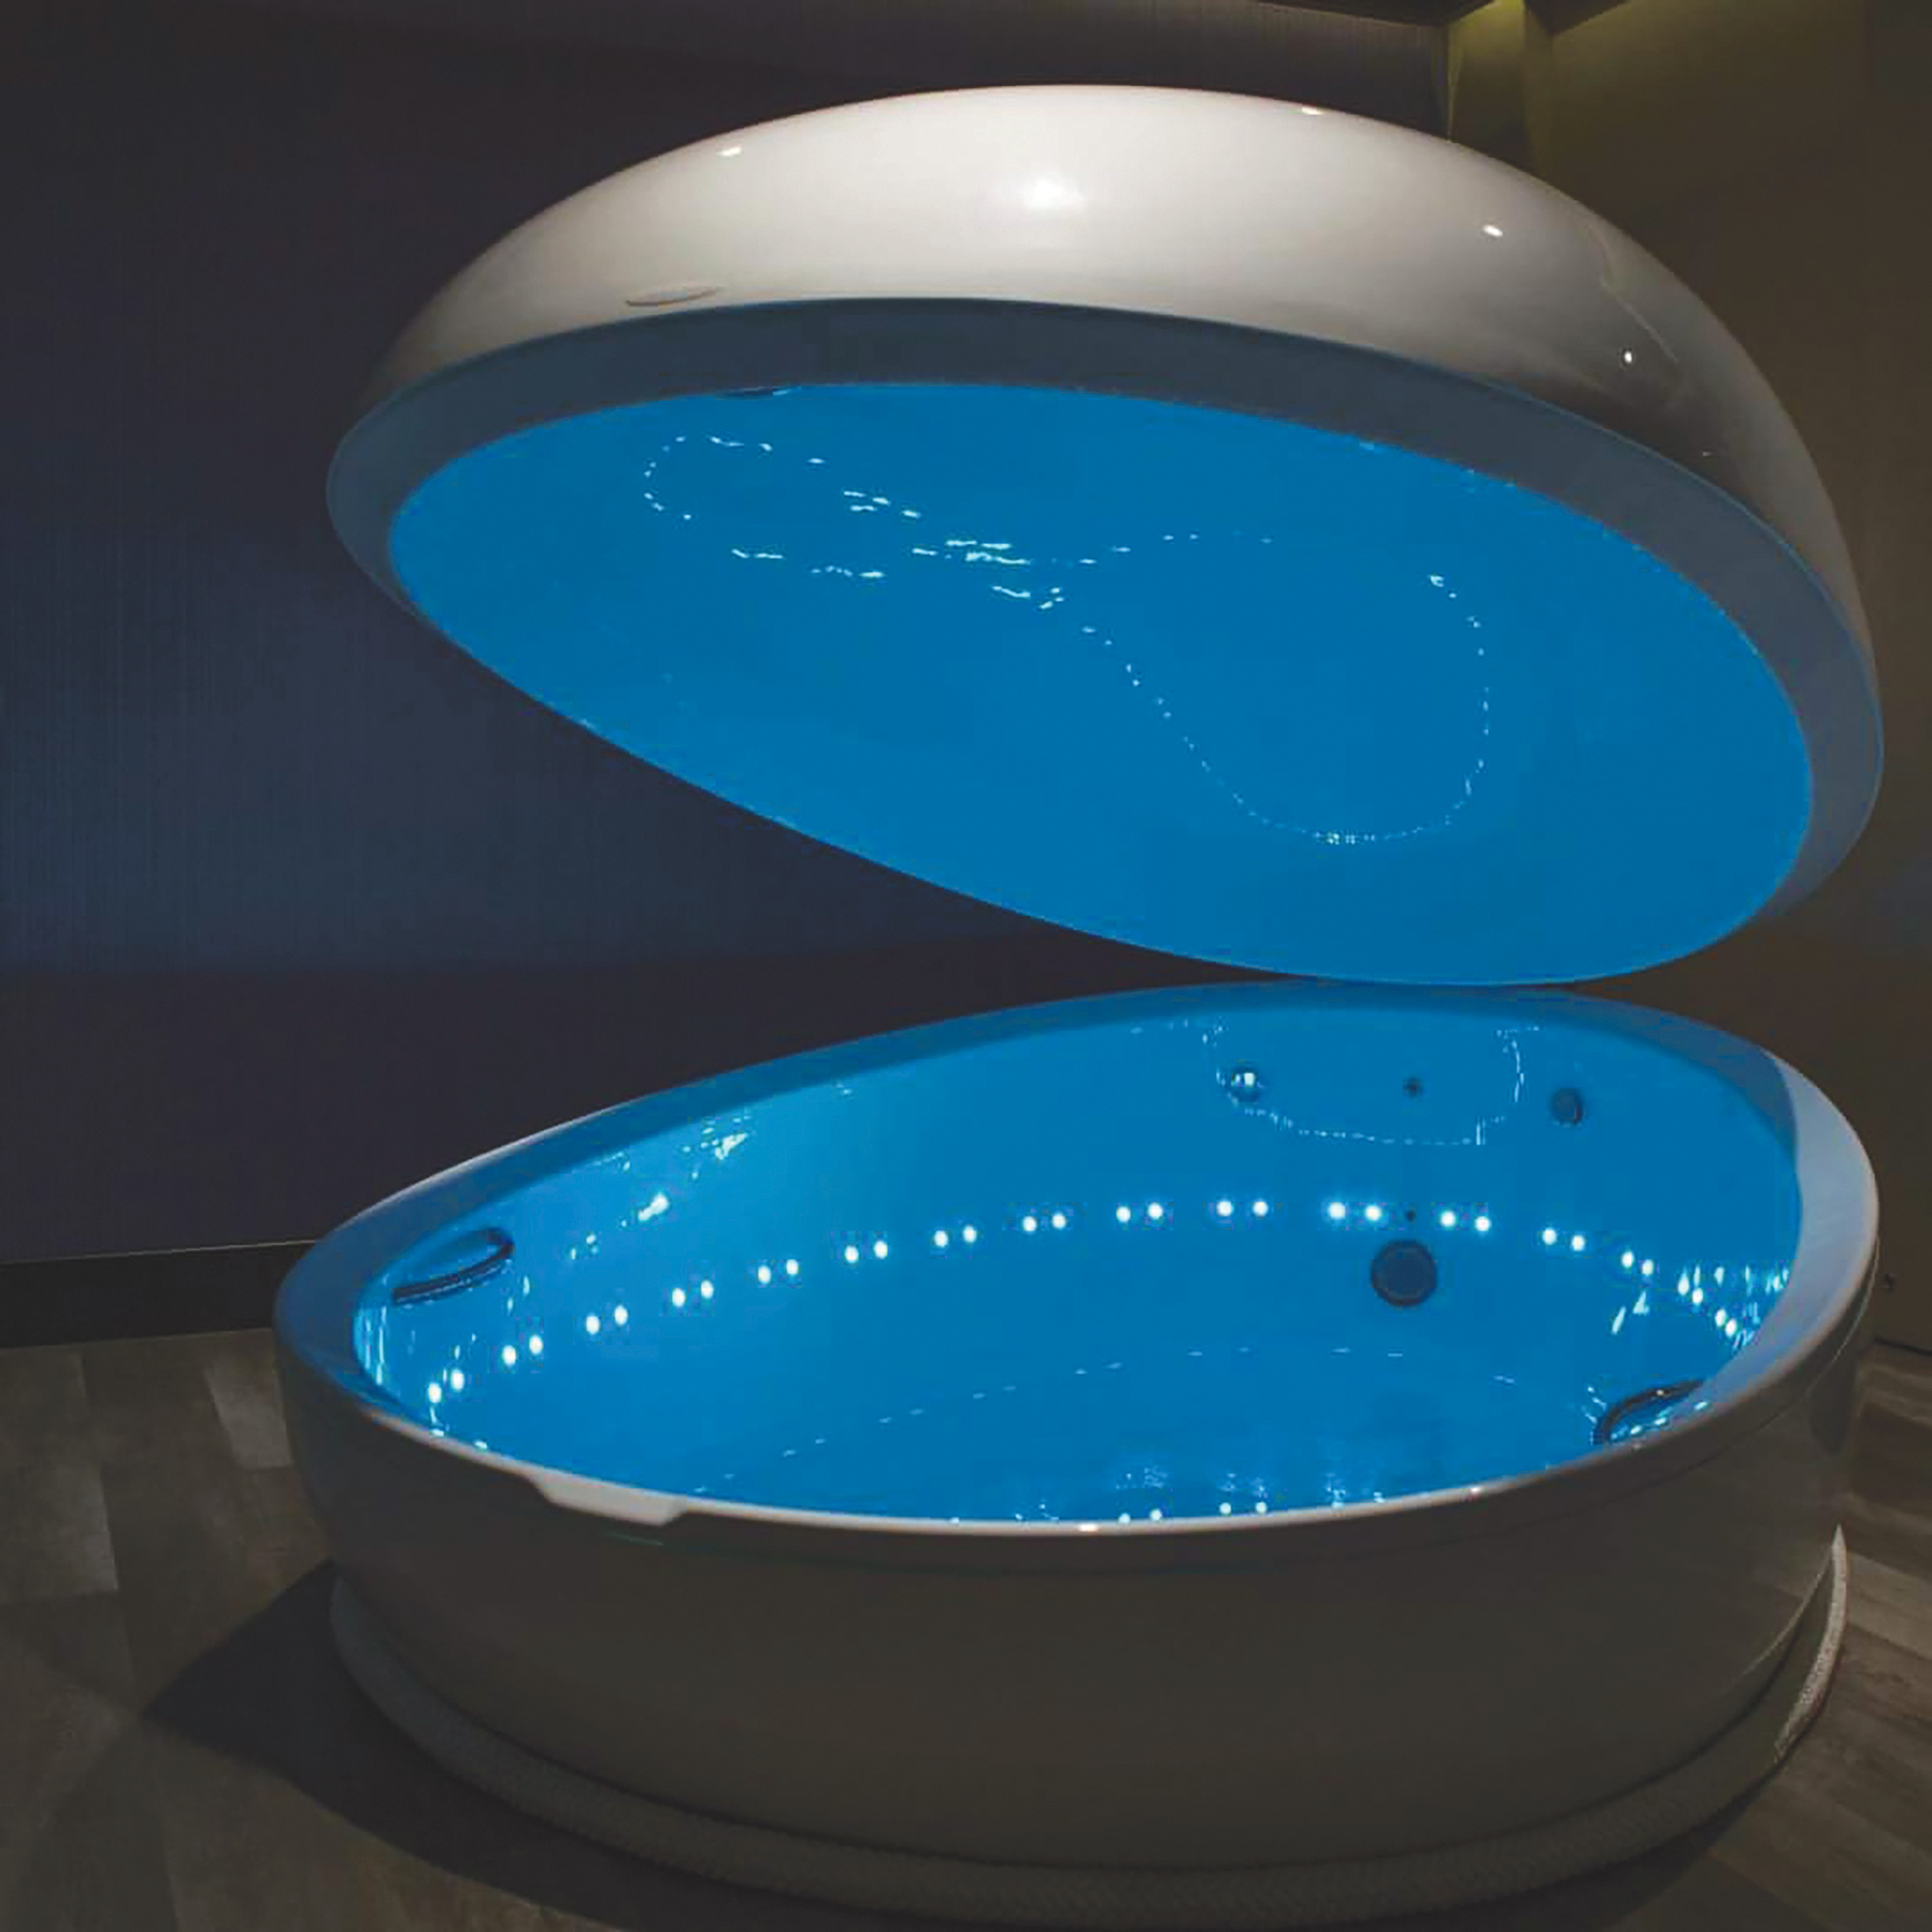 At Indigo Float, customers can unwind in pods filled with water made denser with Epsom salt. The franchise plans to open in the Riverplace Shopping Center at 11111 San Jose Blvd.